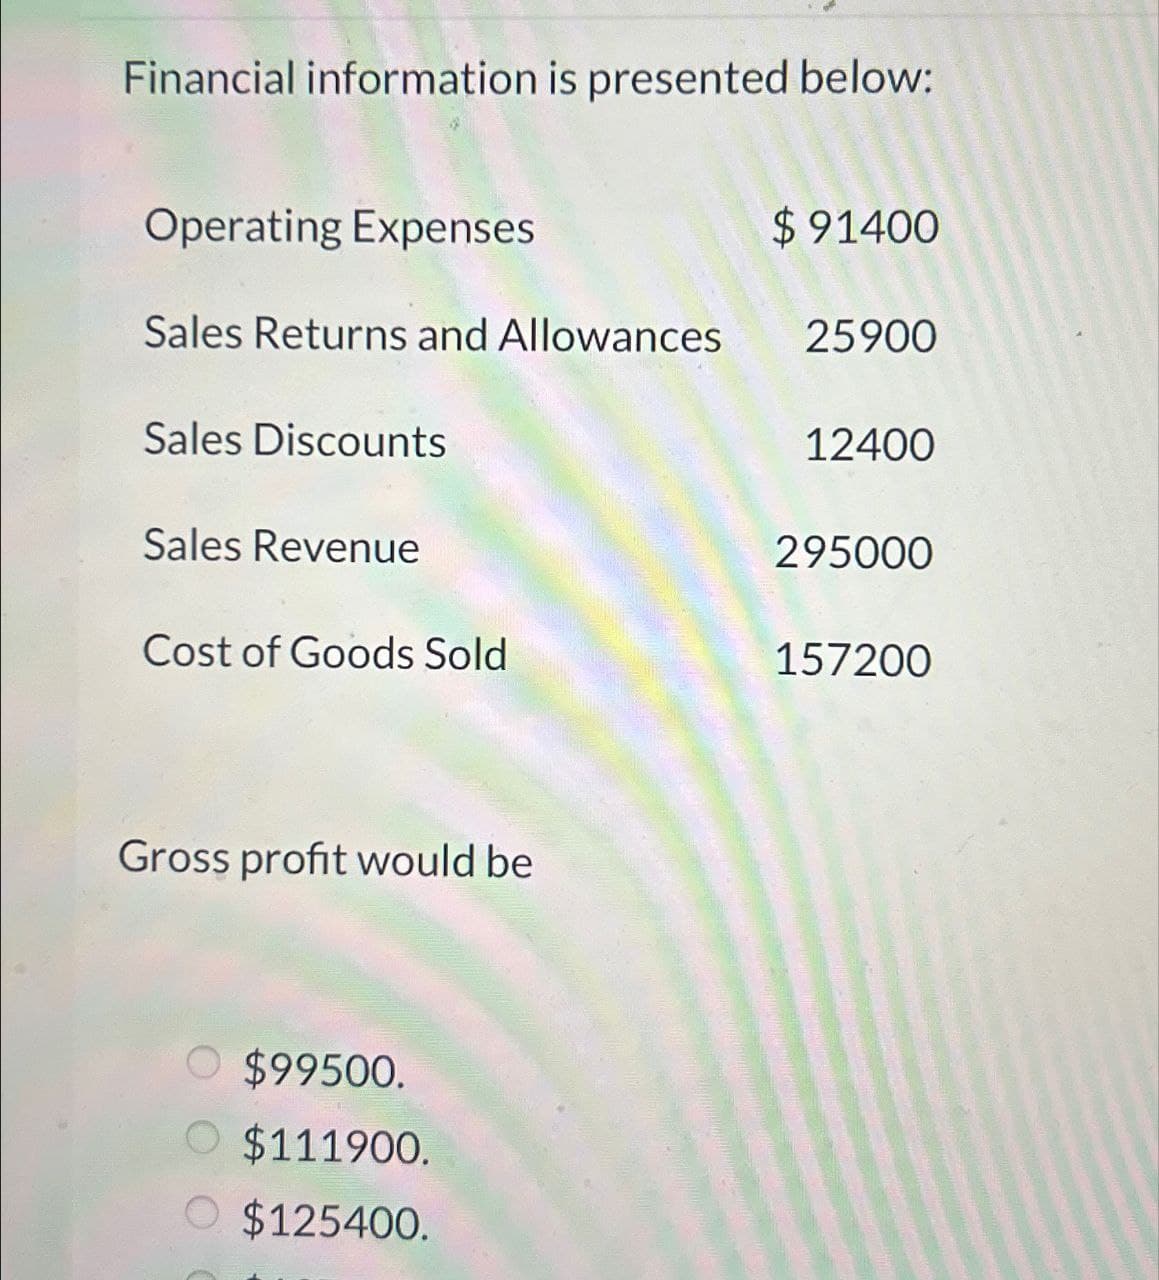 Financial information is presented below:
Operating Expenses
$91400
Sales Returns and Allowances
25900
Sales Discounts
12400
Sales Revenue
295000
Cost of Goods Sold
157200
Gross profit would be
○ $99500.
O $111900.
O $125400.